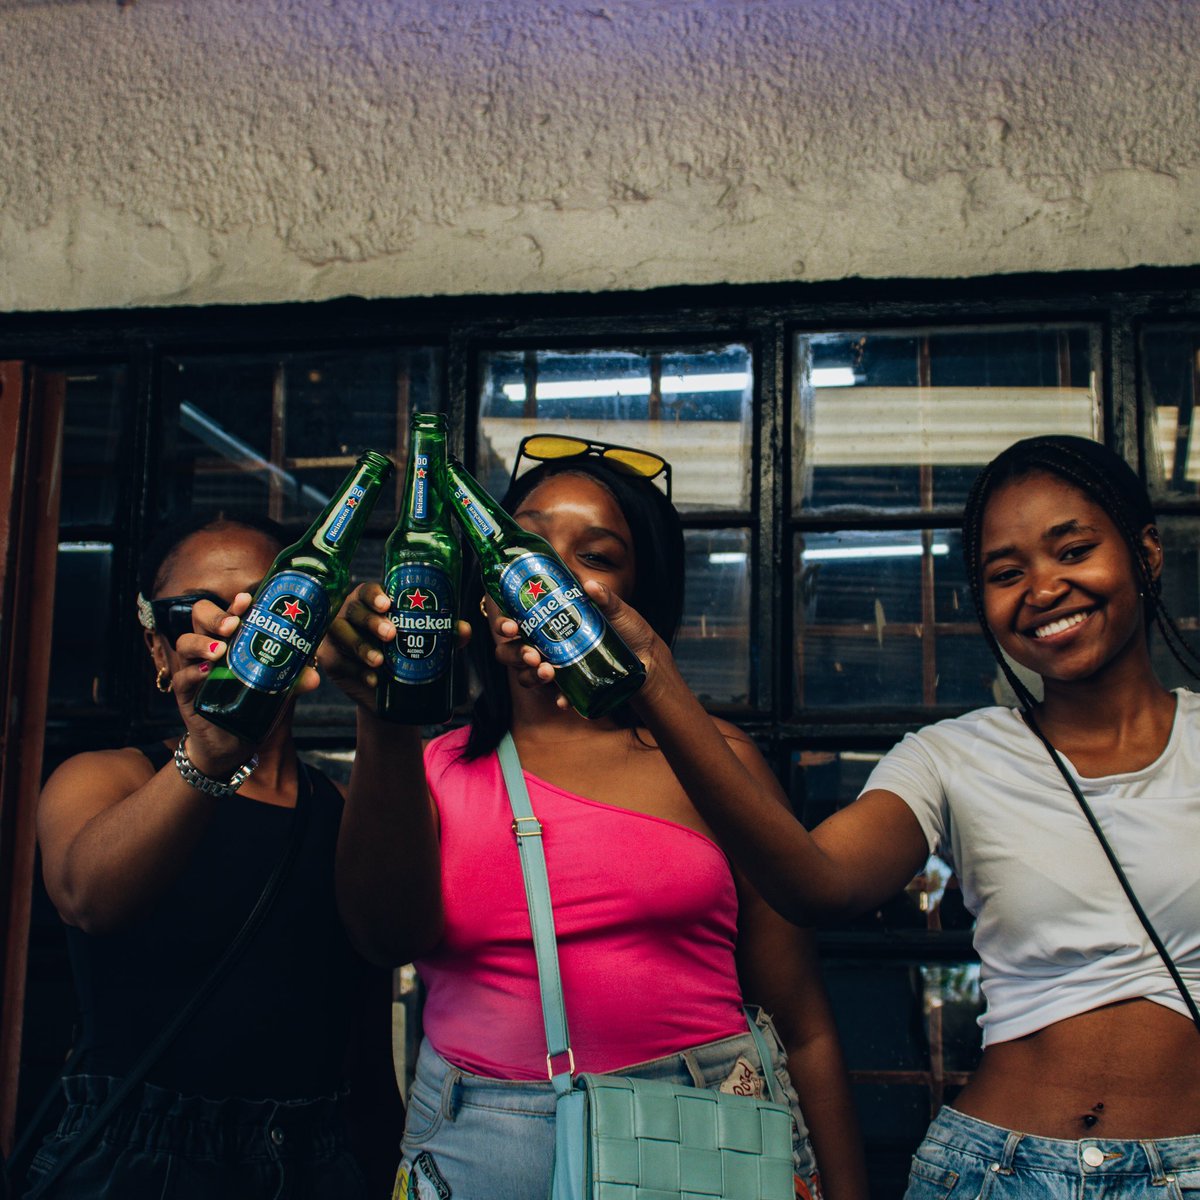 #AD || This past weekend we had a very informative day event at Shiketa Cafe in Sebokeng, thanks to @Heineken_SA for keeping the audience hydrated.💚 

Here are some of the highlights 🍻

#Heineken00 #NowYouCan #RecapTuesday #Green #Beer